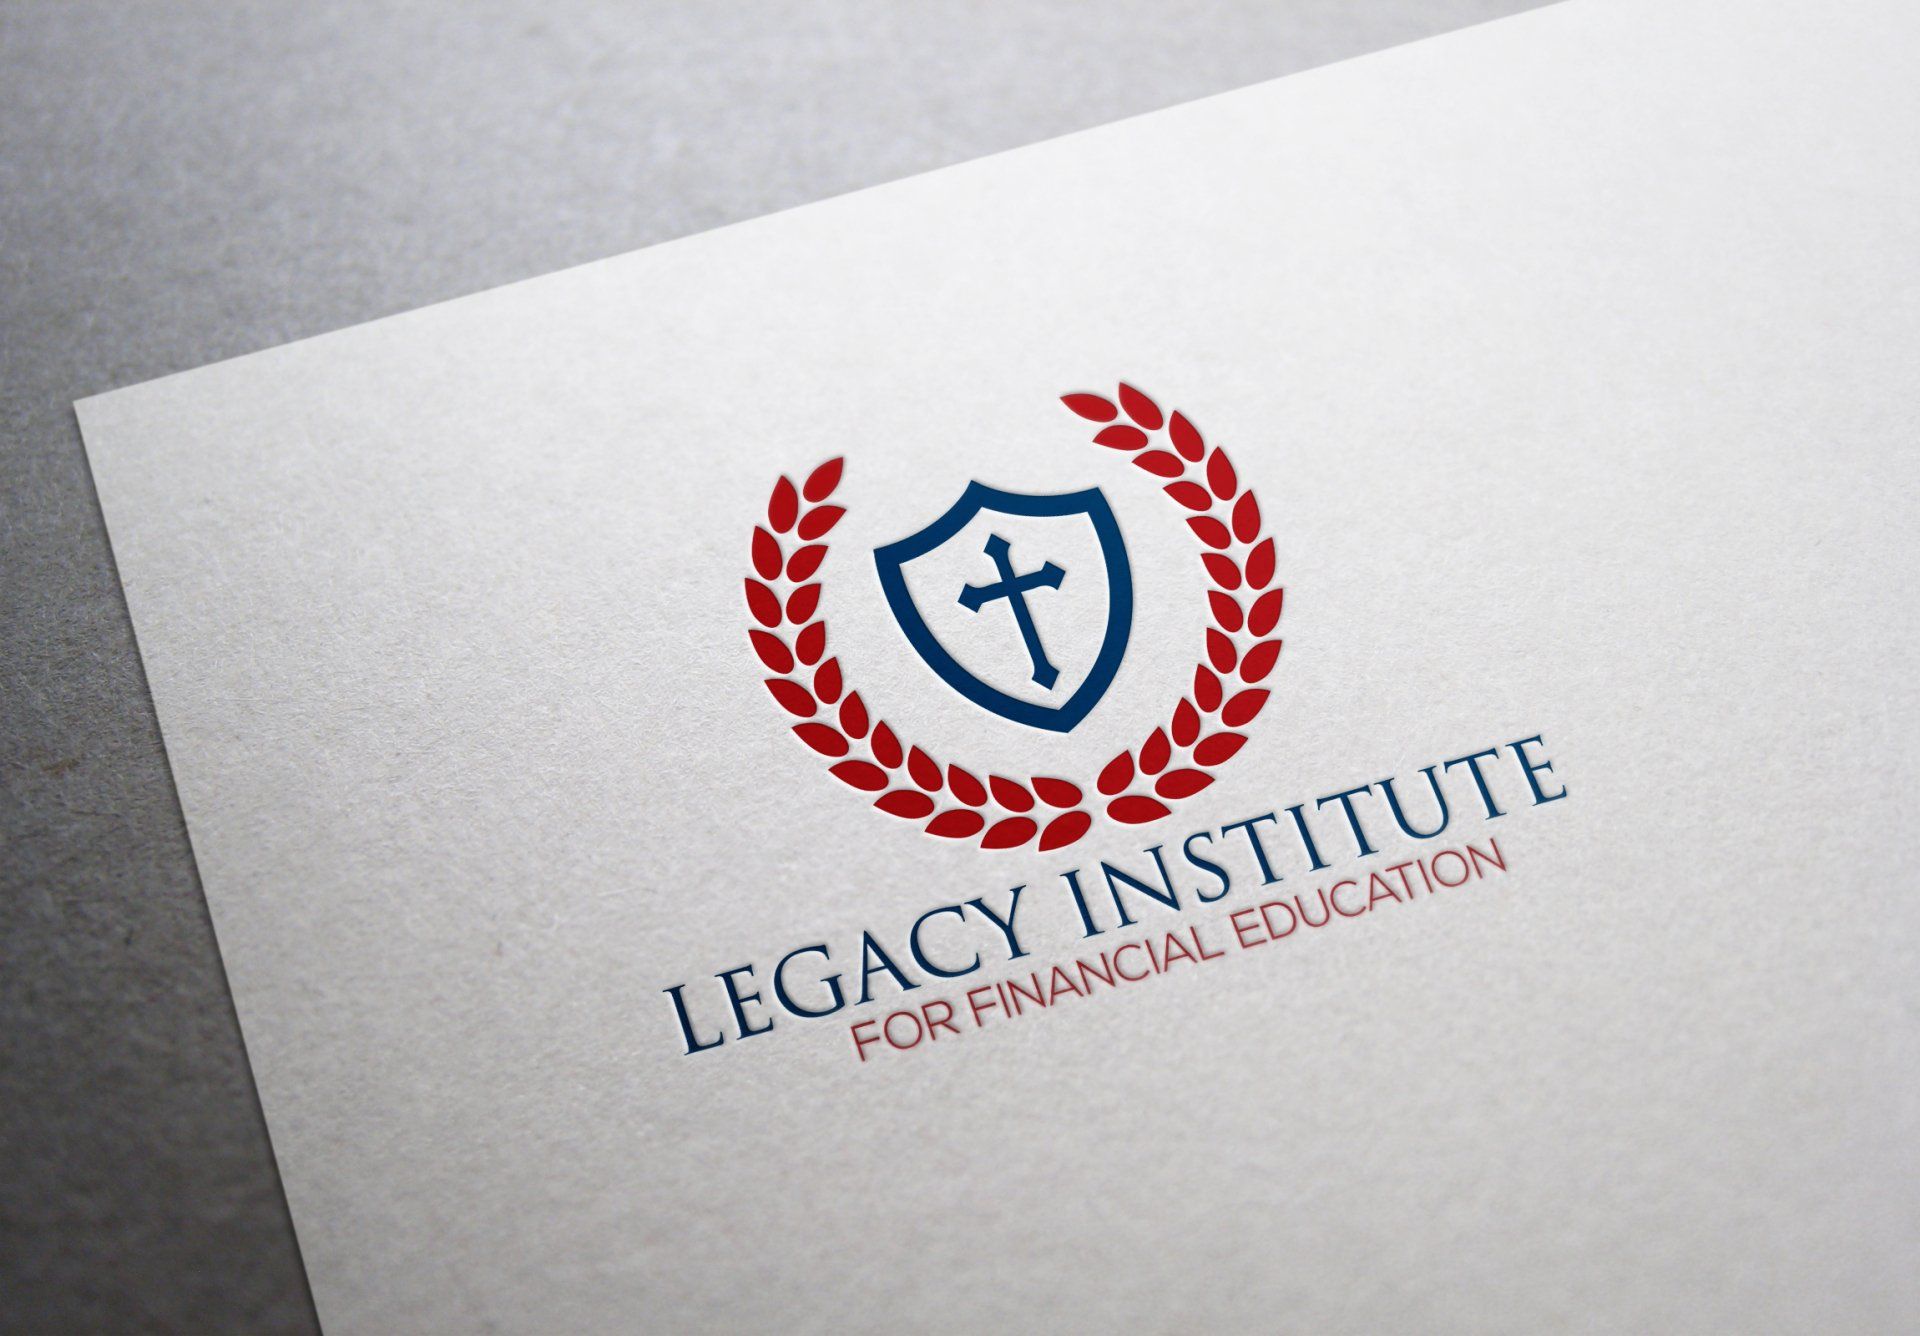 Legacy Institute logo on paper